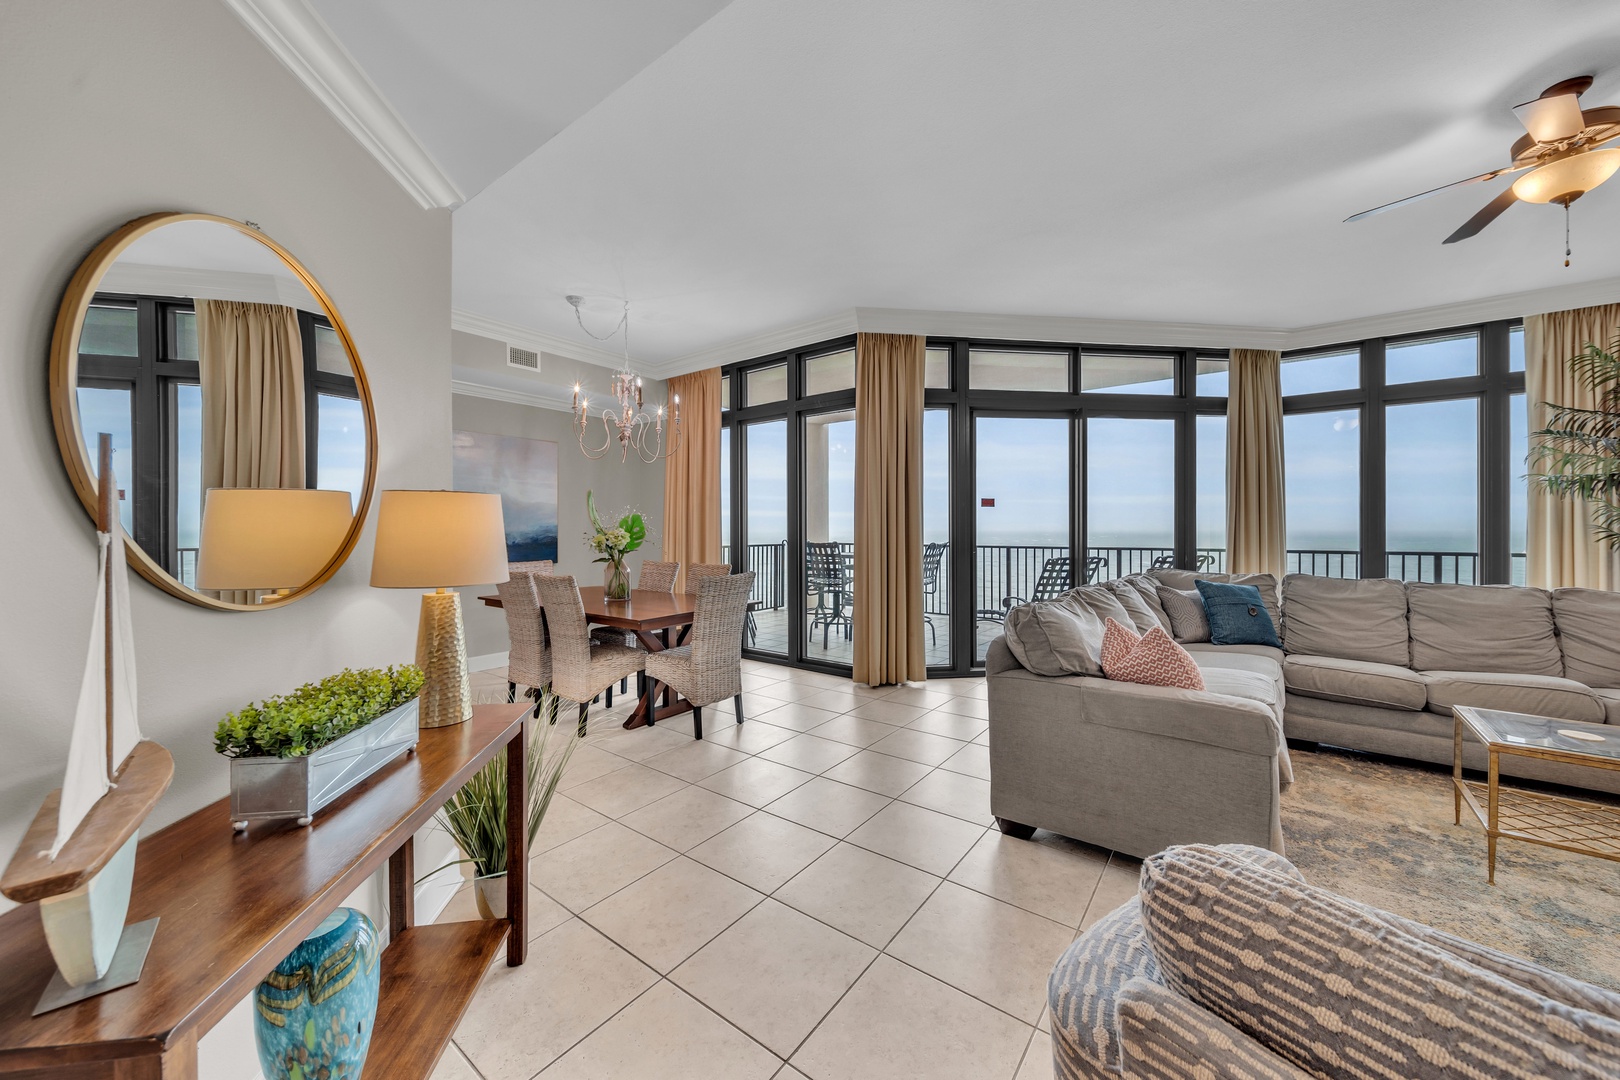 Open concept with balcony access